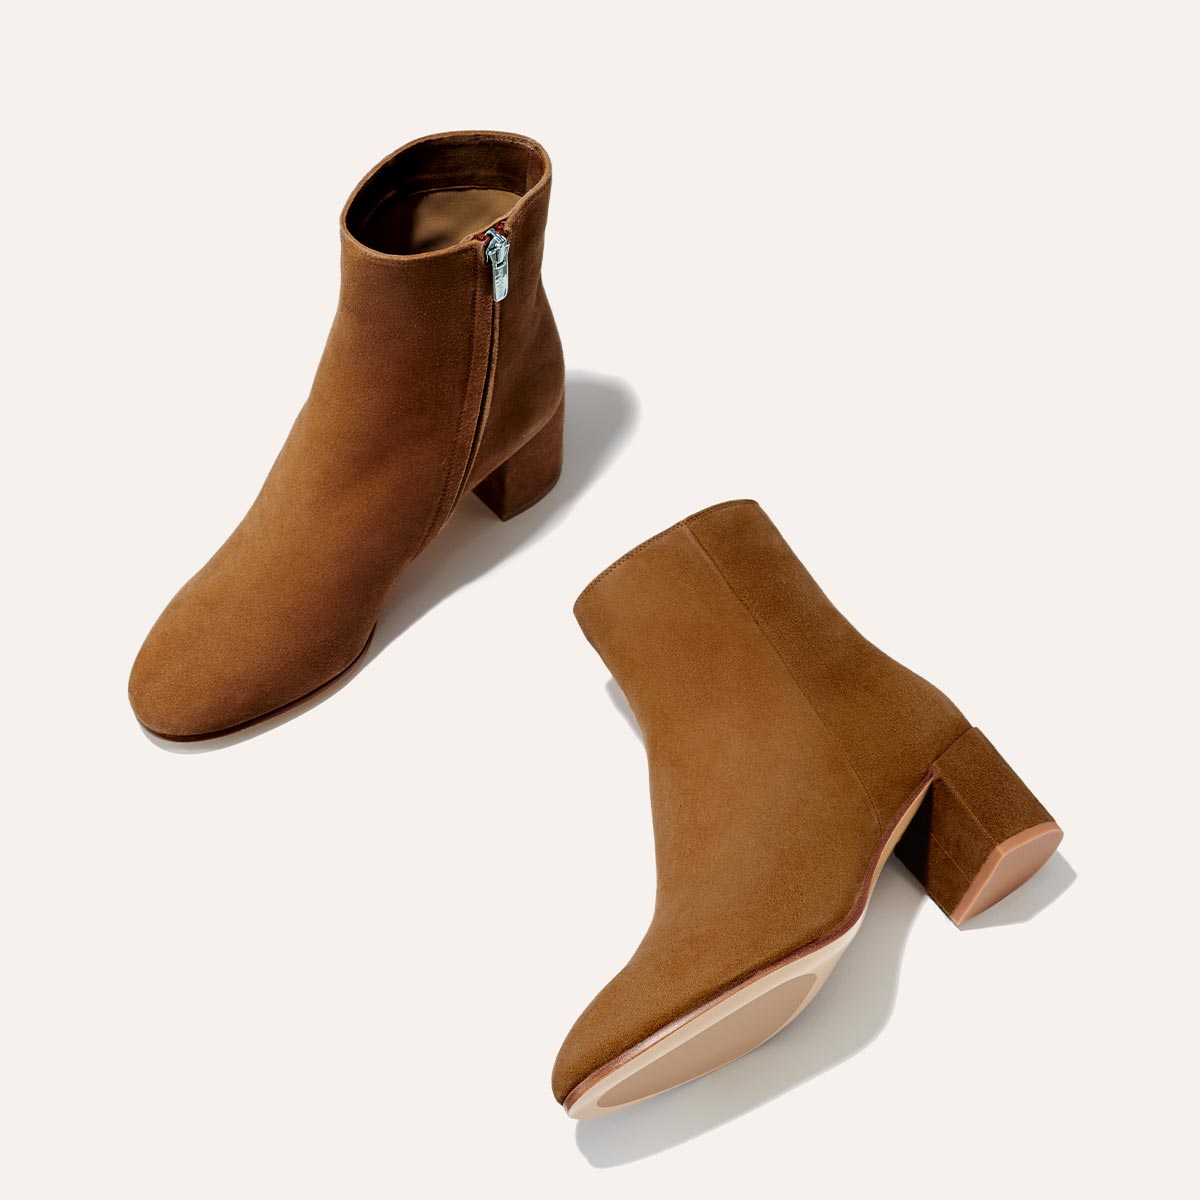 The Boot - Chestnut Suede